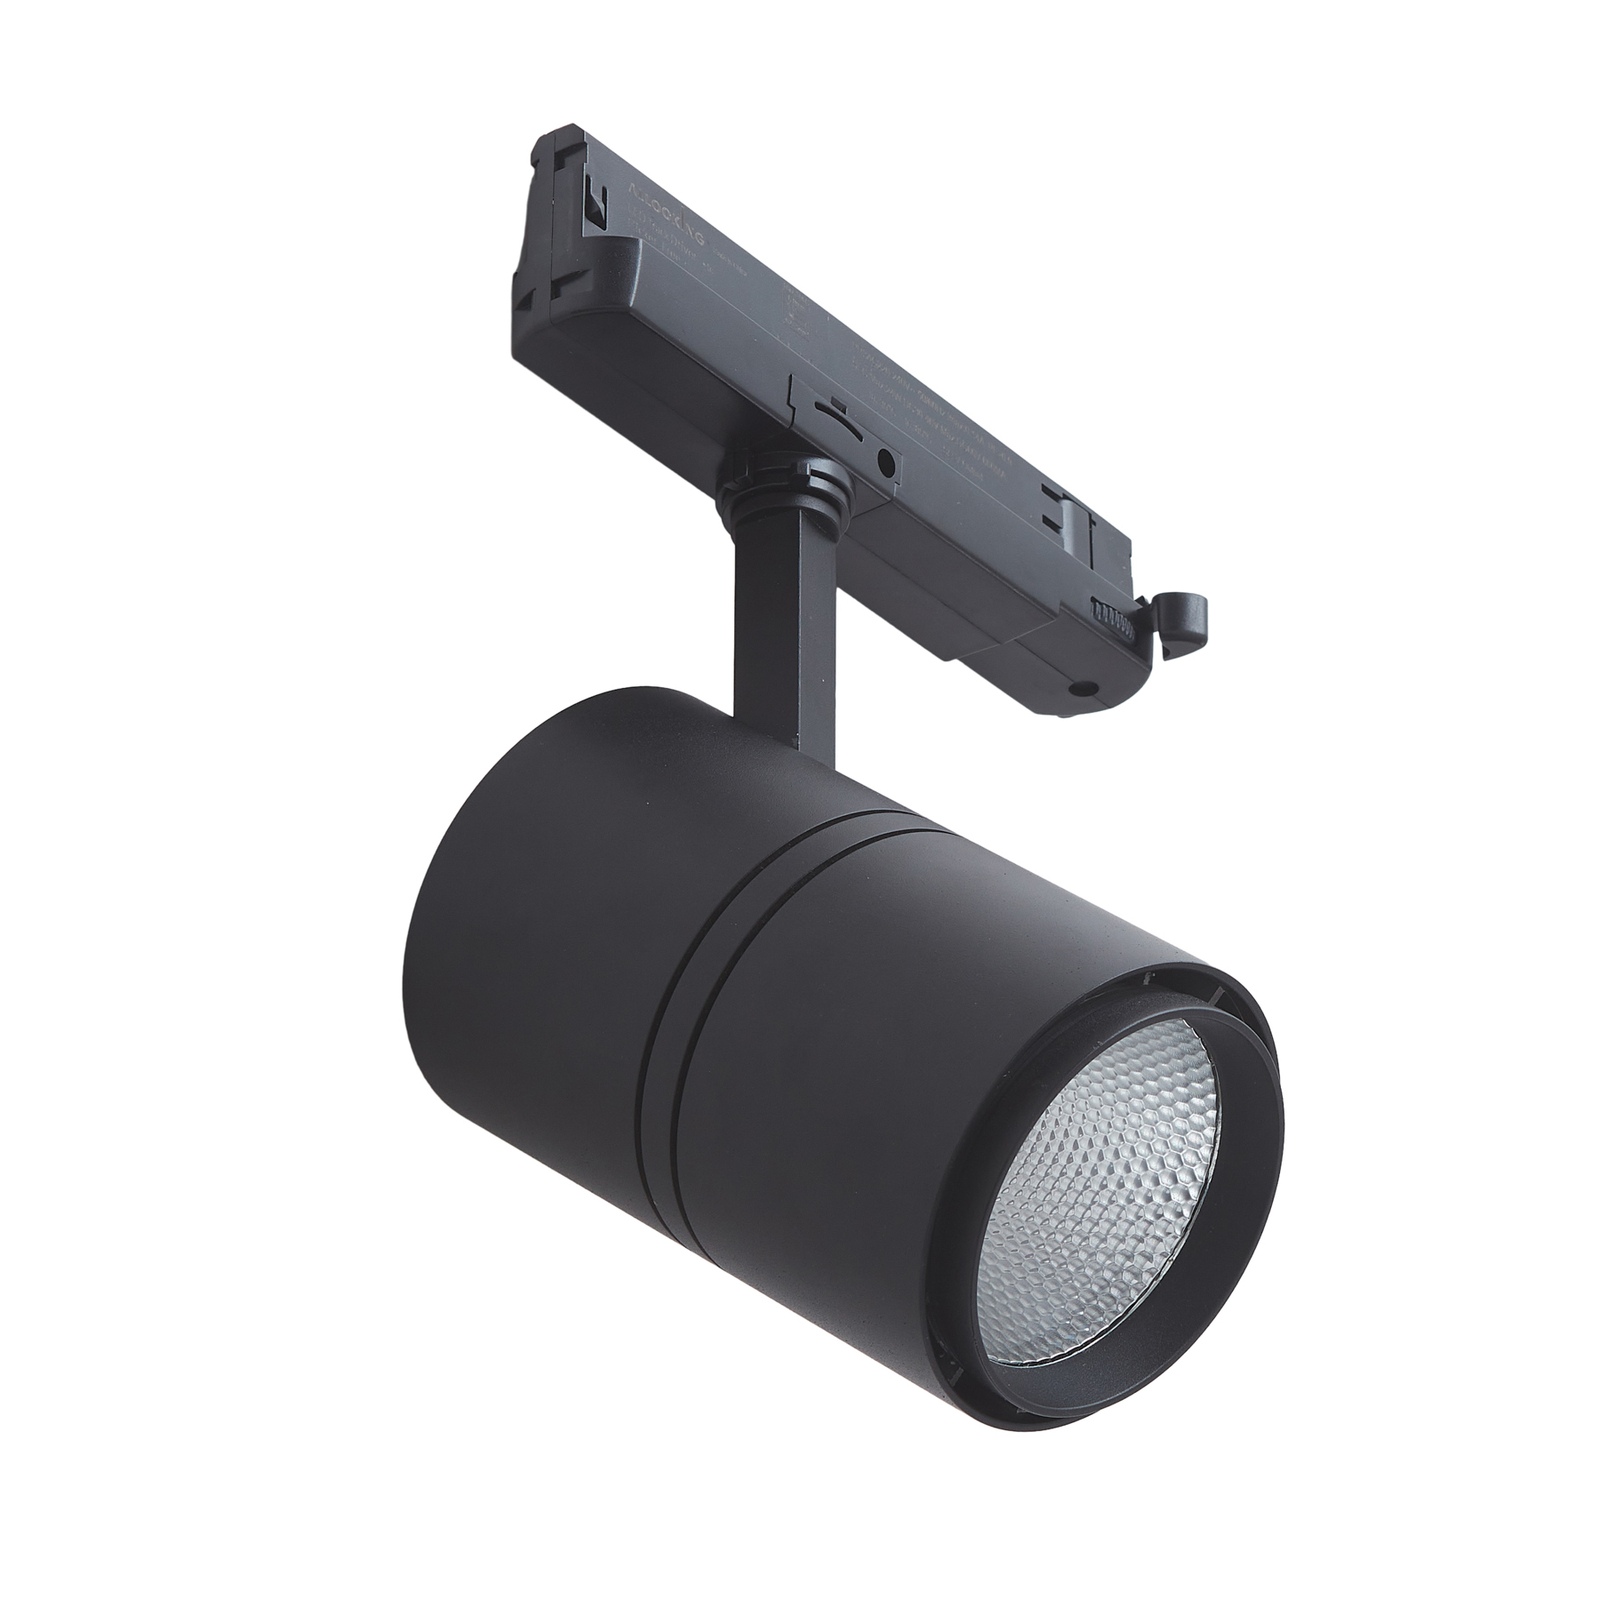 Arcchio LED track spotlight Marny, black, 3-phase, dimmable.